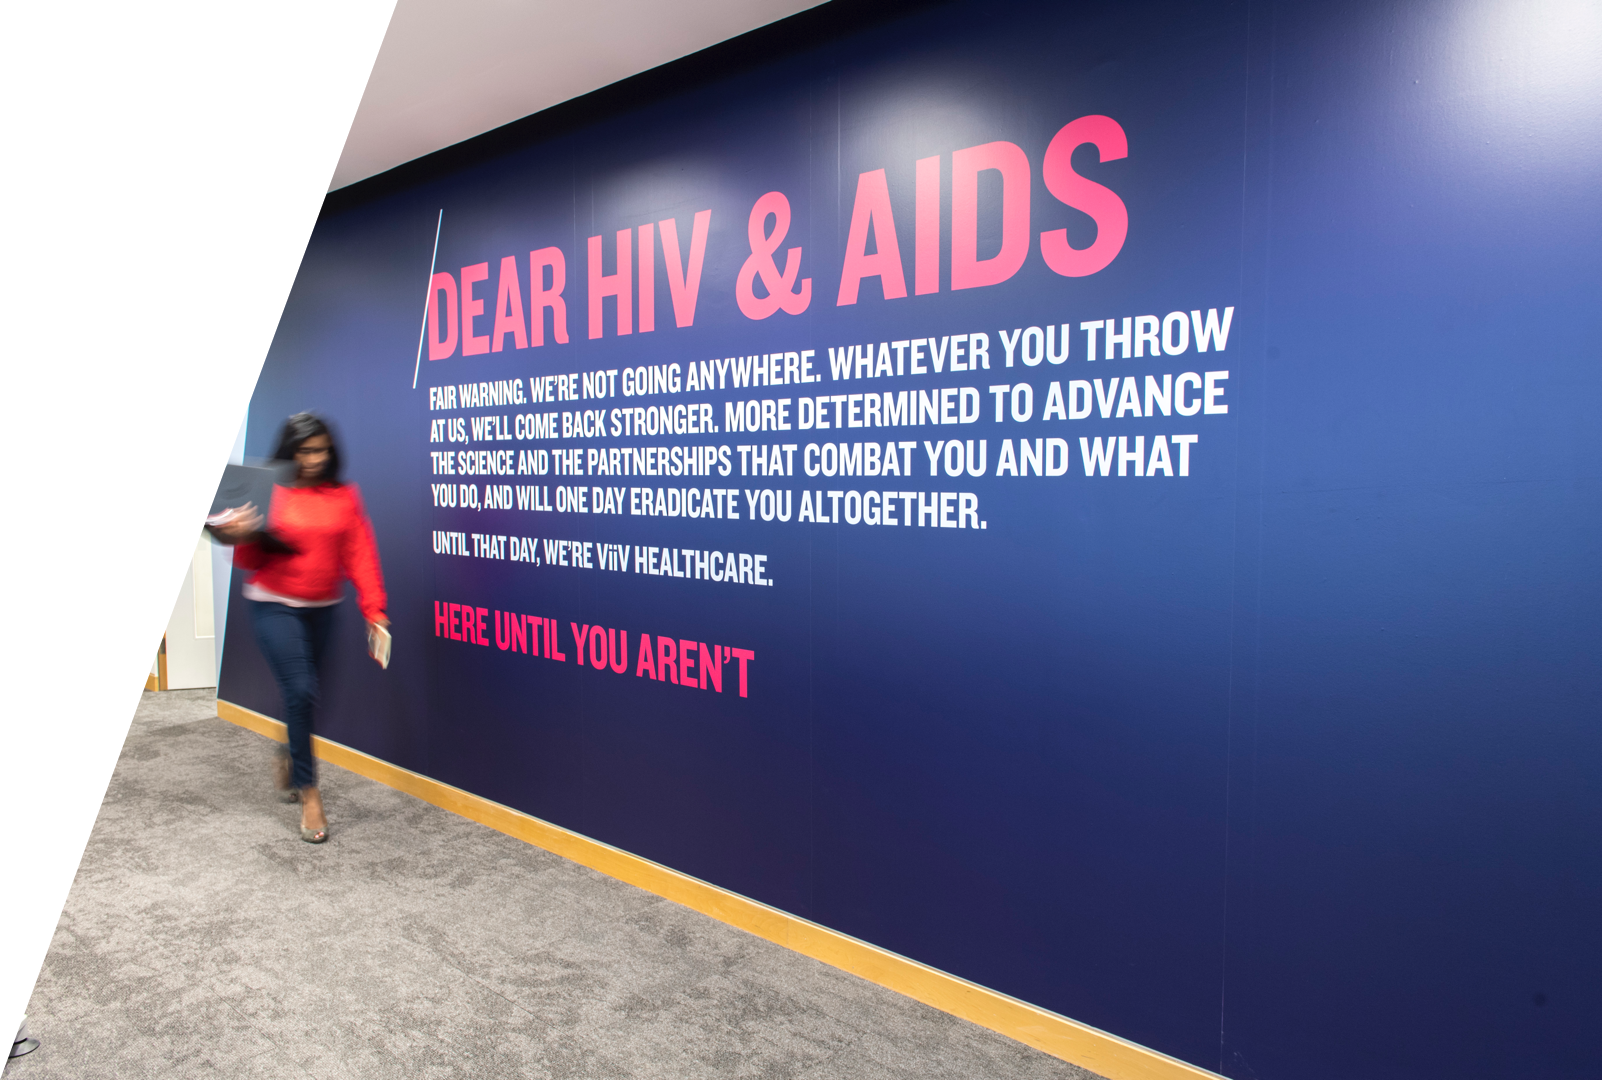 Dear HIV & AIDS – We’re not going anywhere